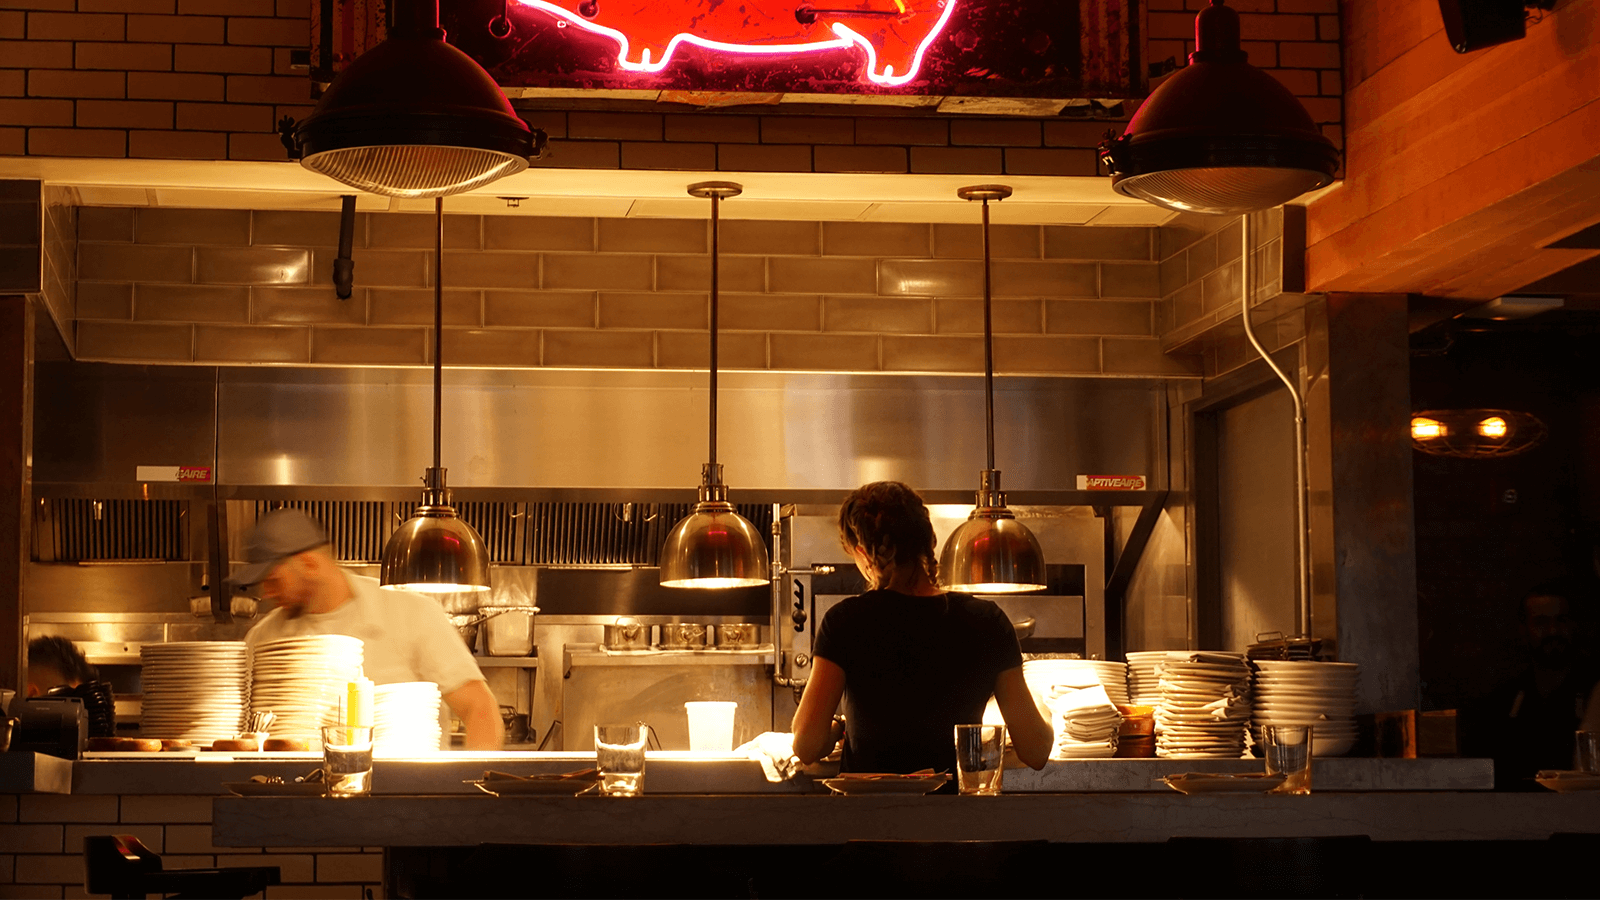 Restaurant staff works behind the counter in a dimly lit establishment